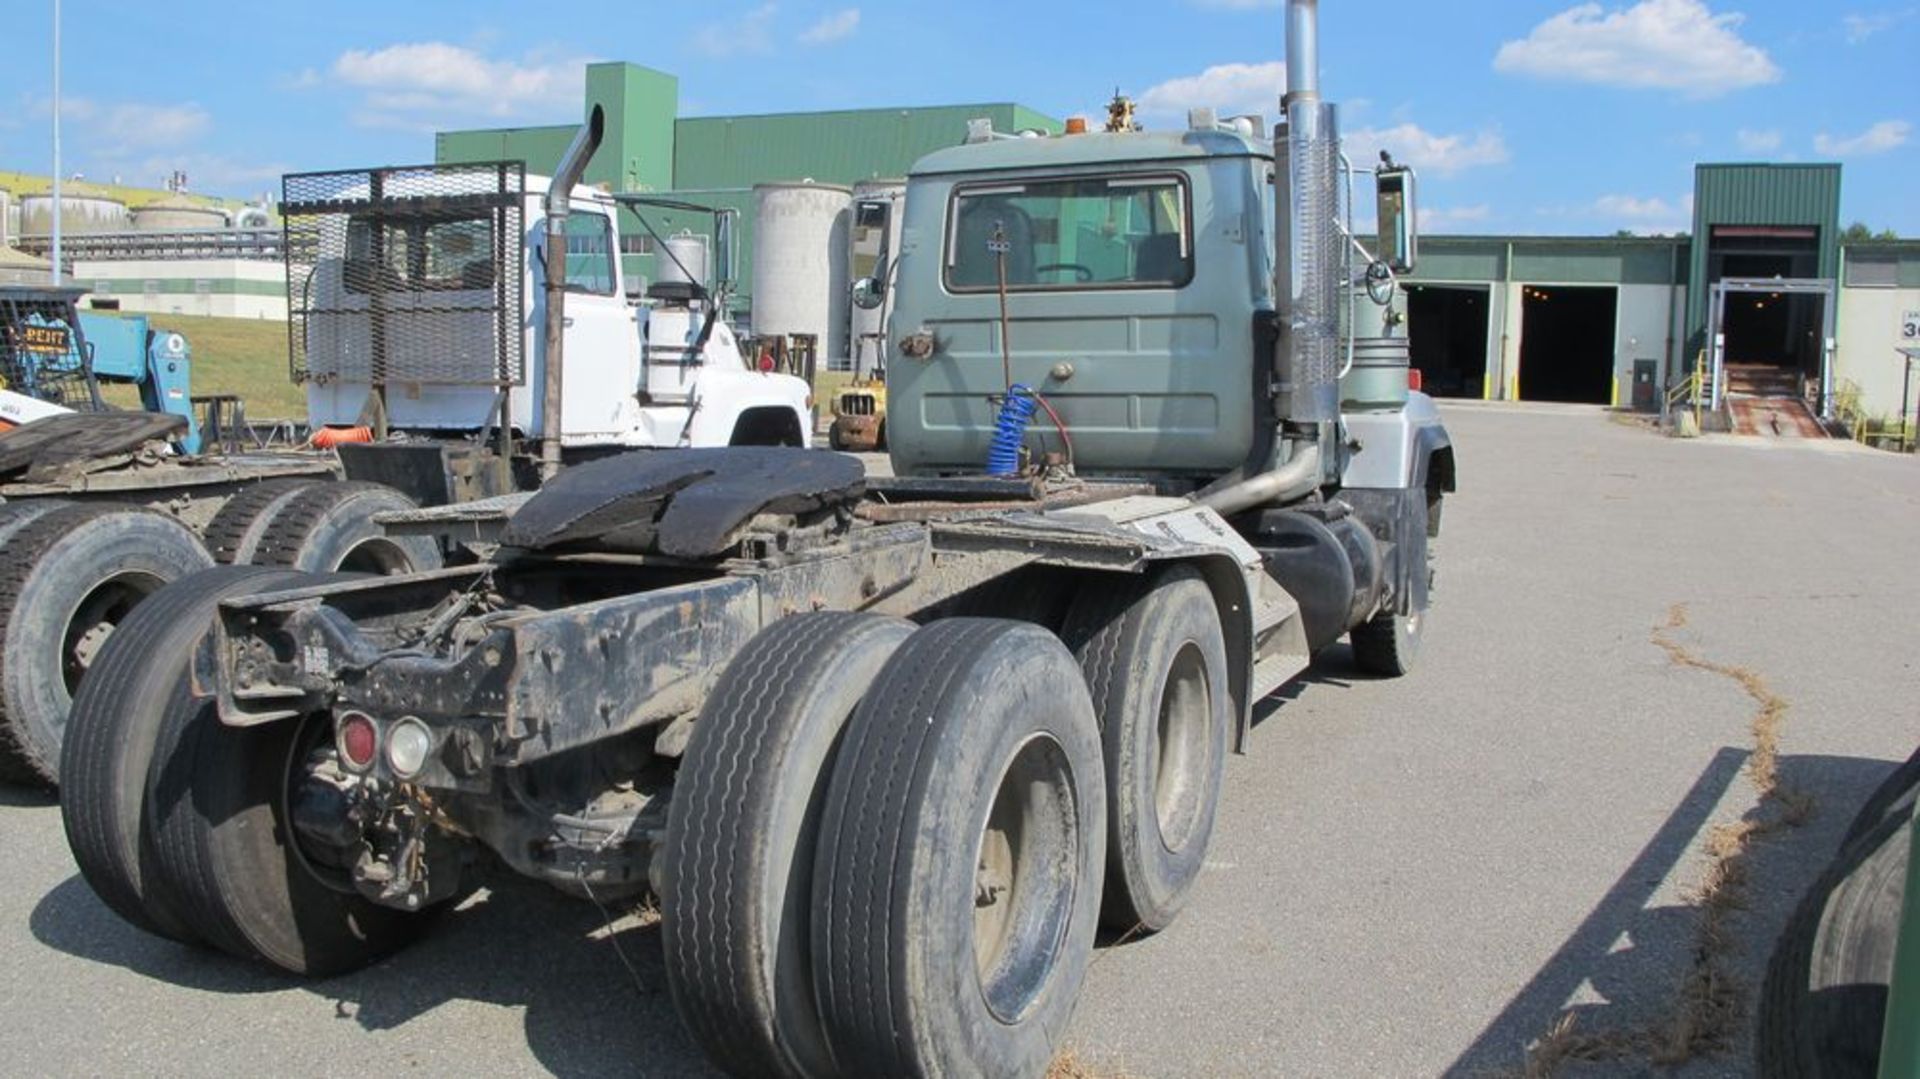 MACK TRACTOR (GREY), RD6885 YARD TRUCK, VIN #1M2P267Y9XMO47498 (RUNNING) (WAREHOUSE 30 - PARKING - Image 2 of 11